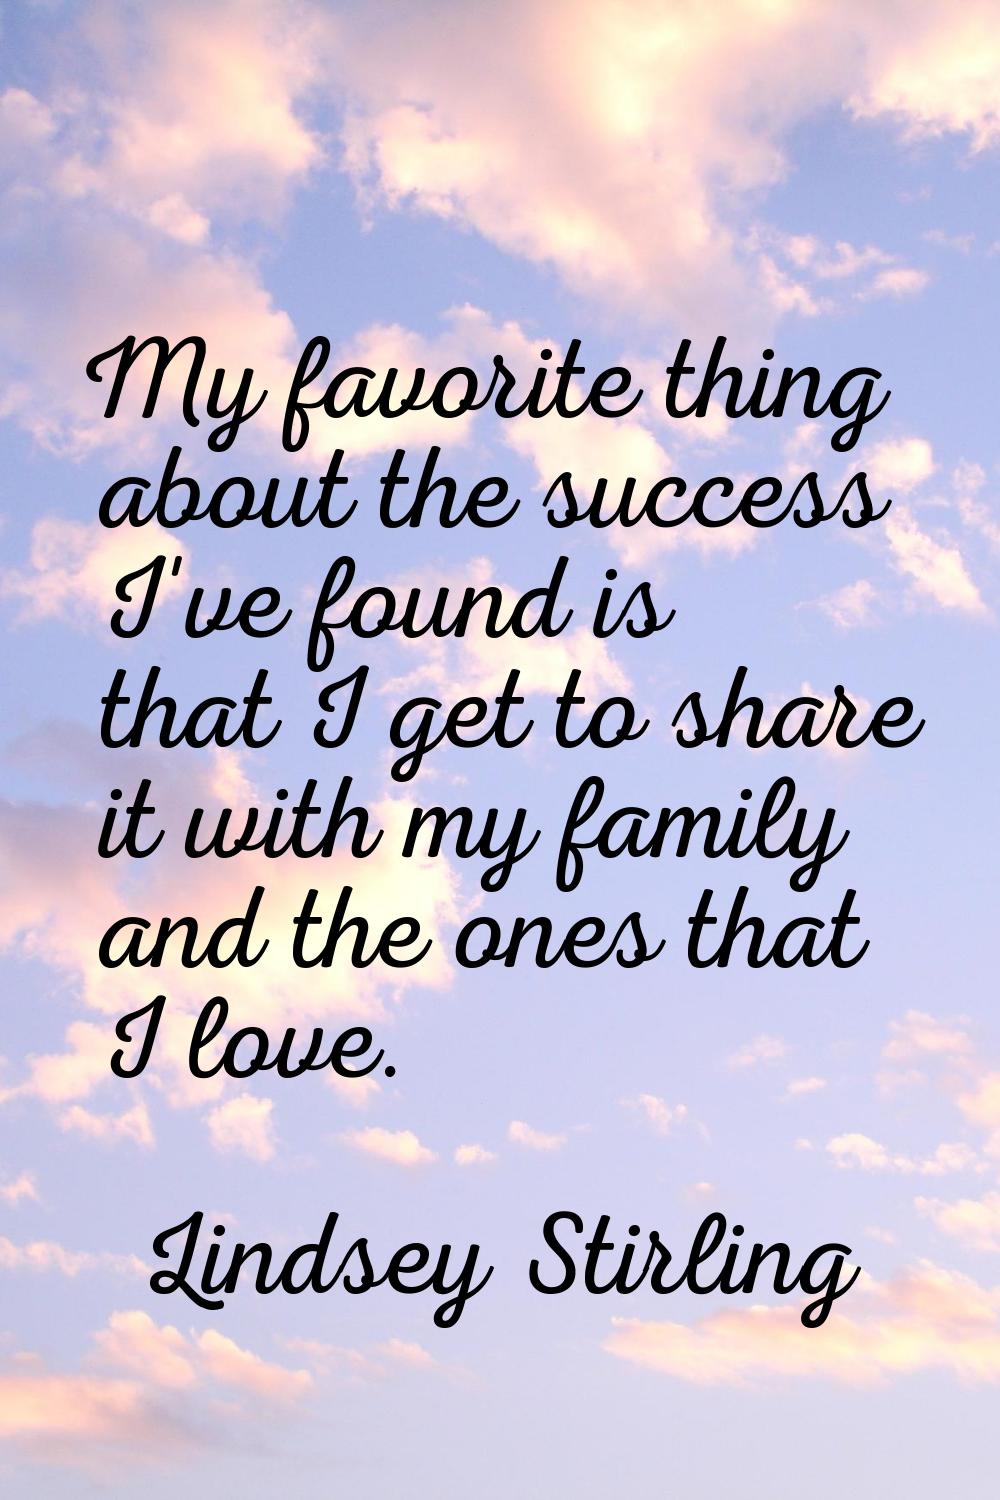 My favorite thing about the success I've found is that I get to share it with my family and the one